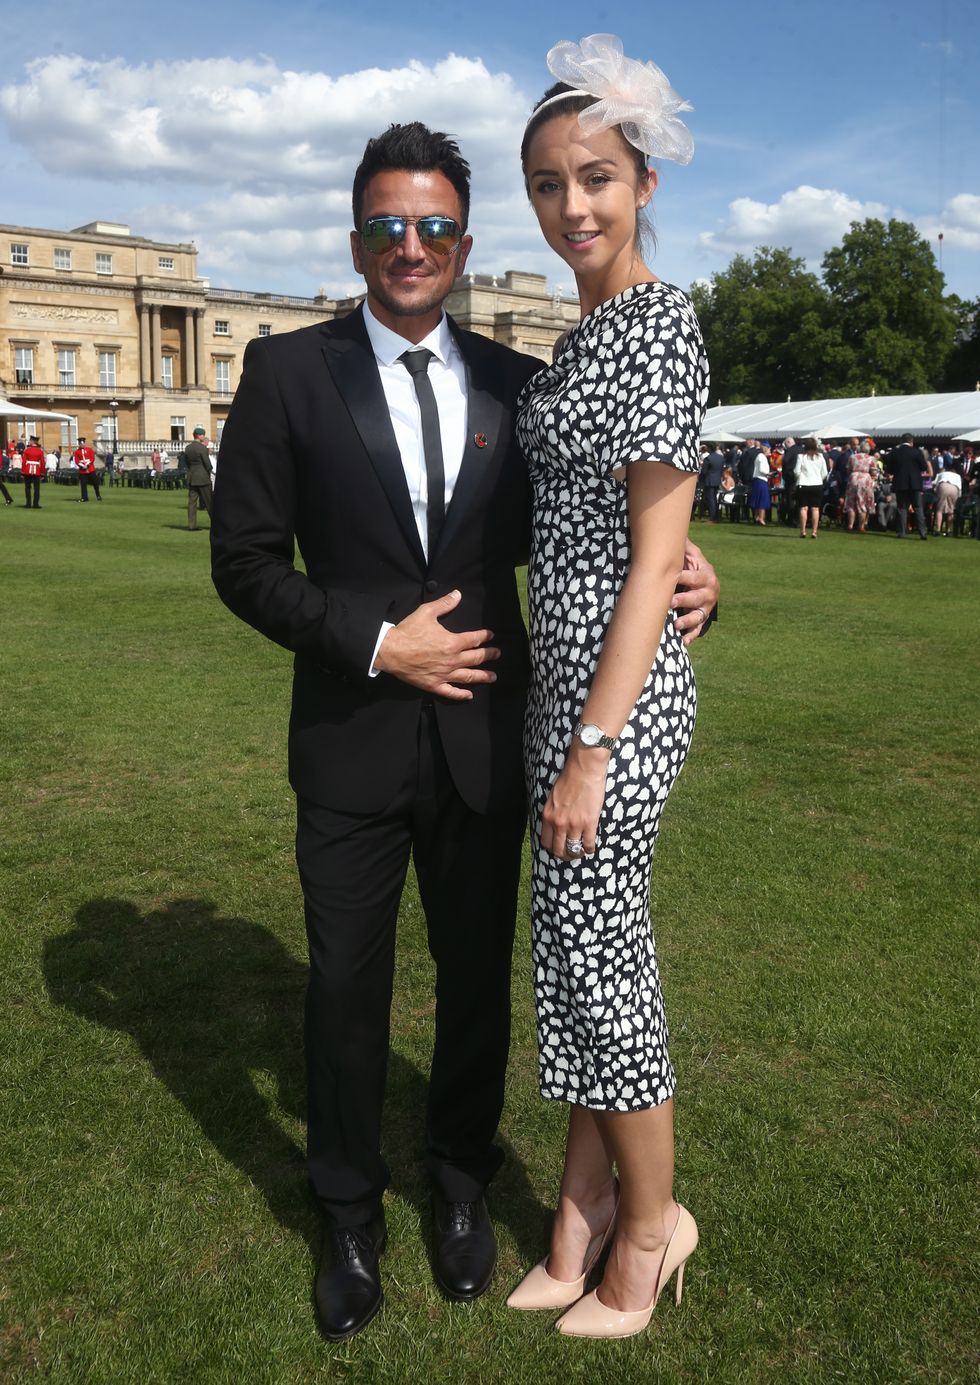 peter and emily attend the annual not forgotten association garden party at buckingham palace on may 23rd 2016